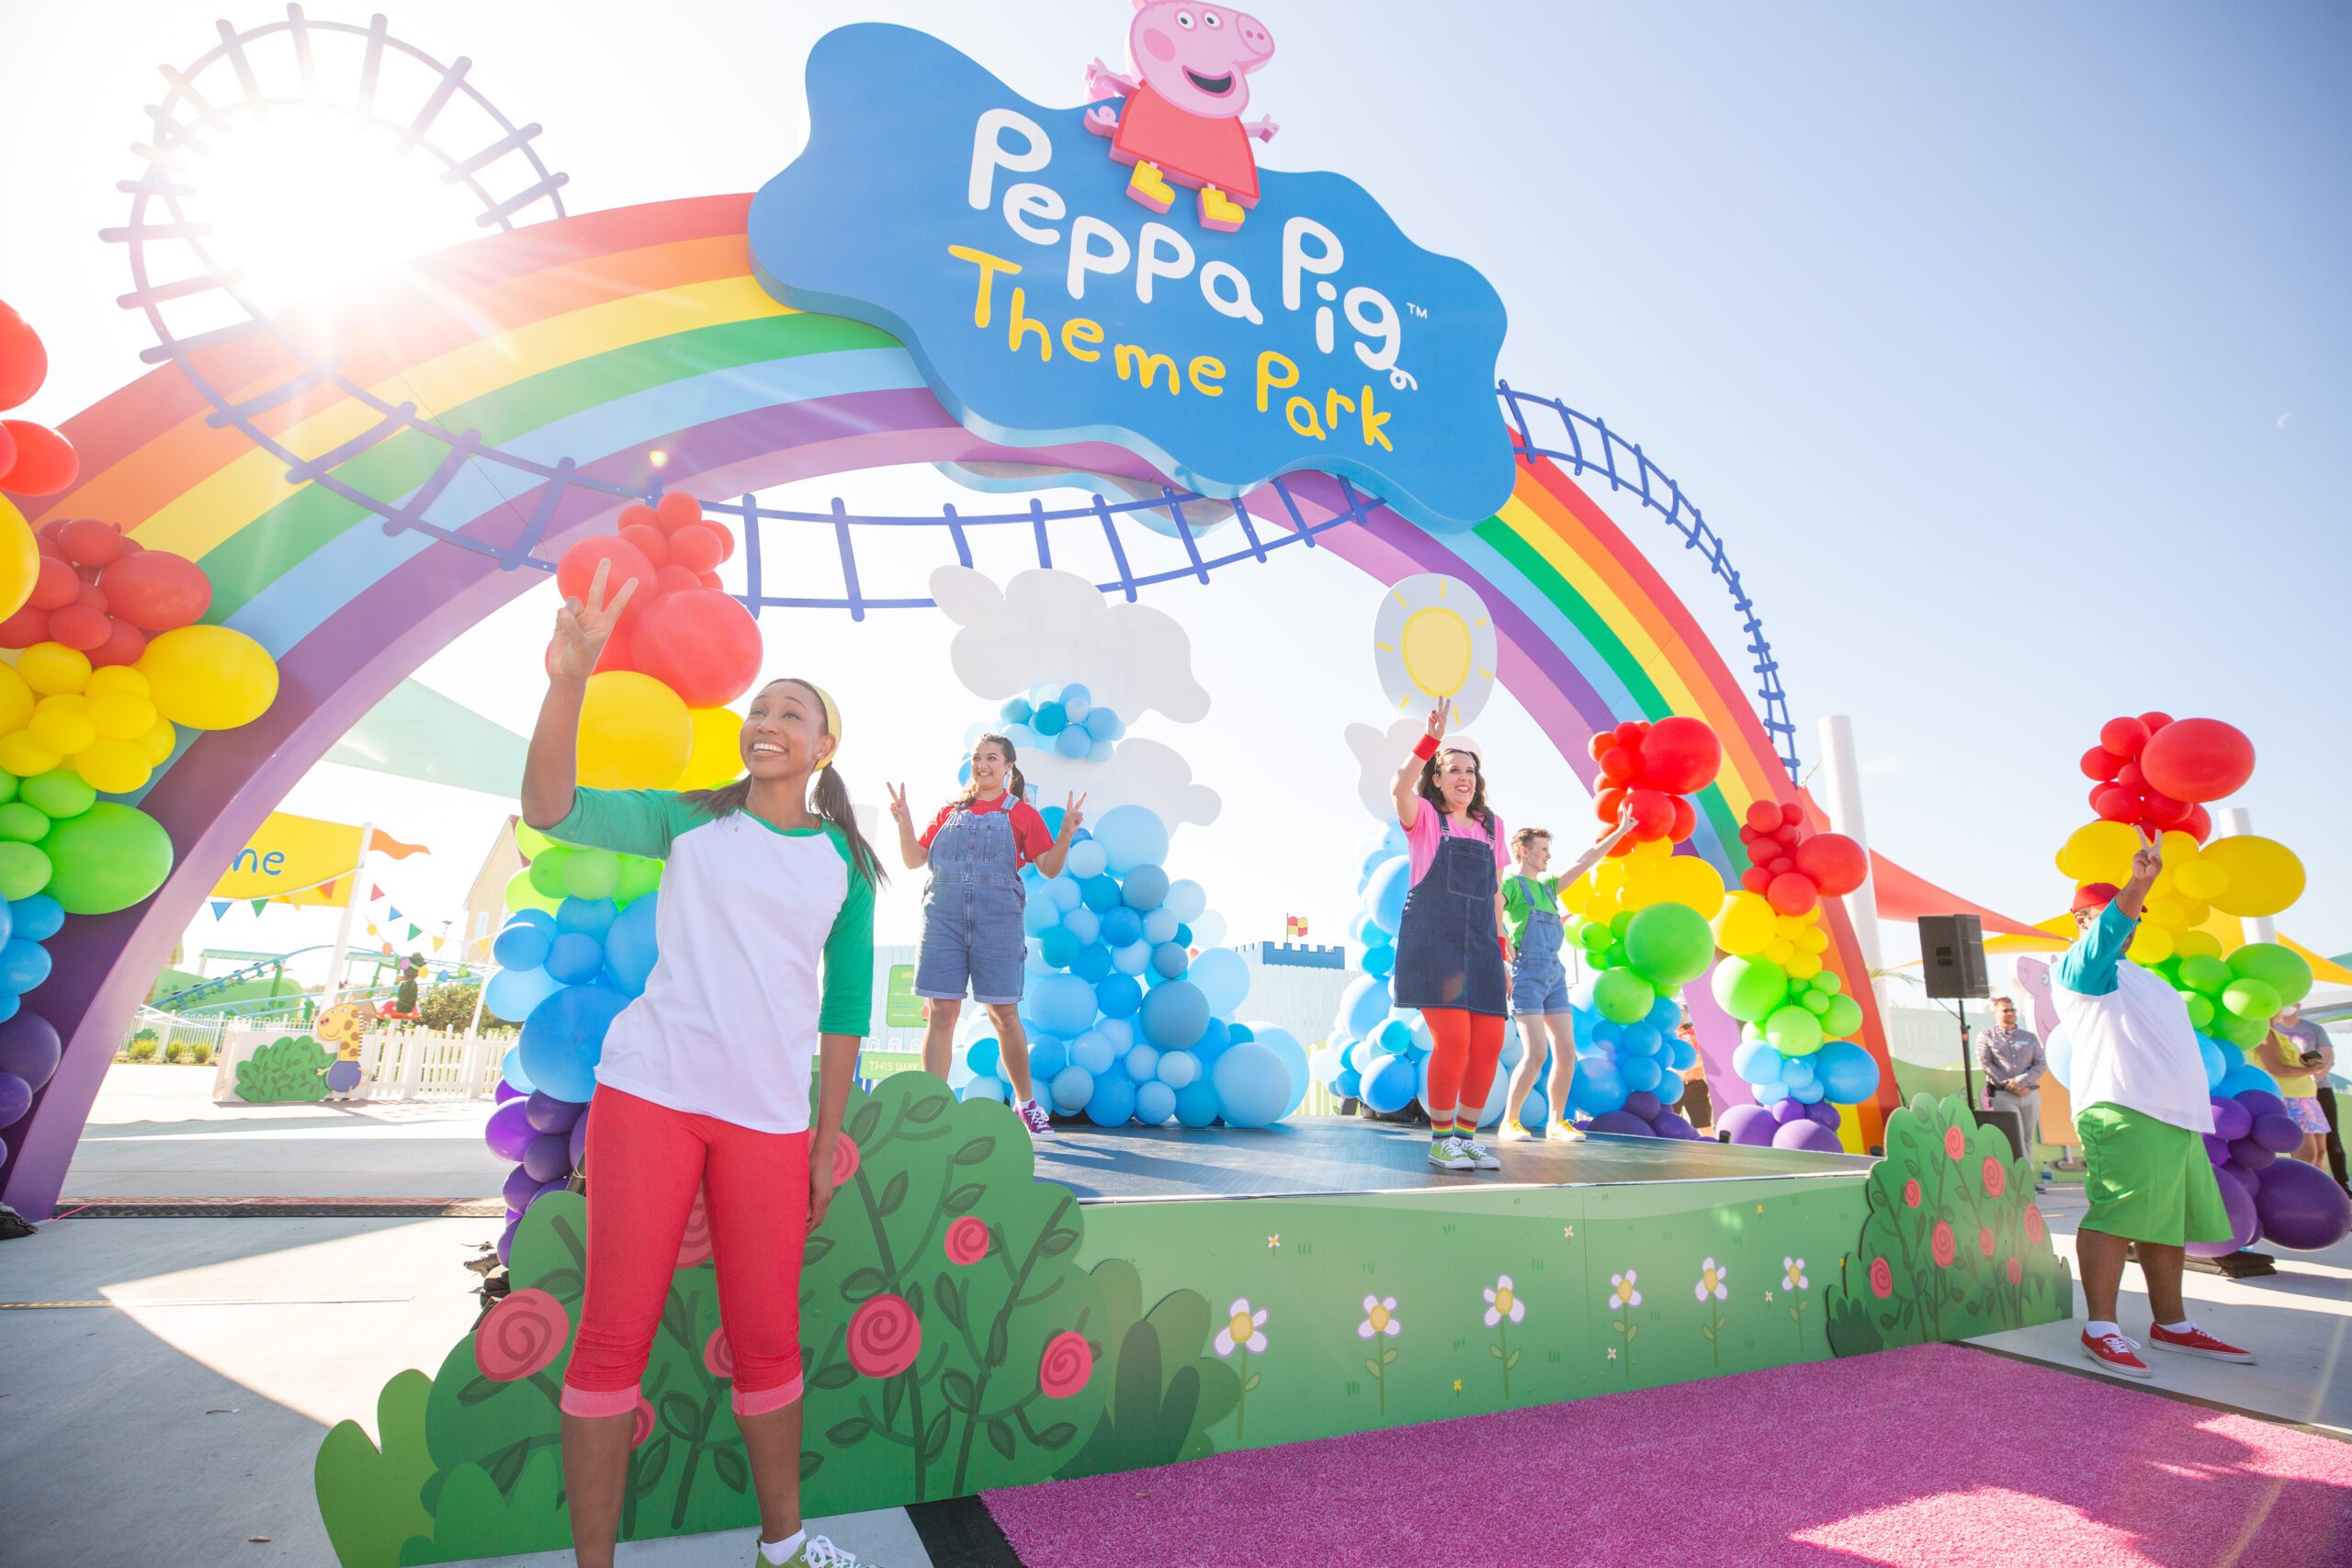 World's first Peppa Pig theme park opens in Winter Haven, Florida